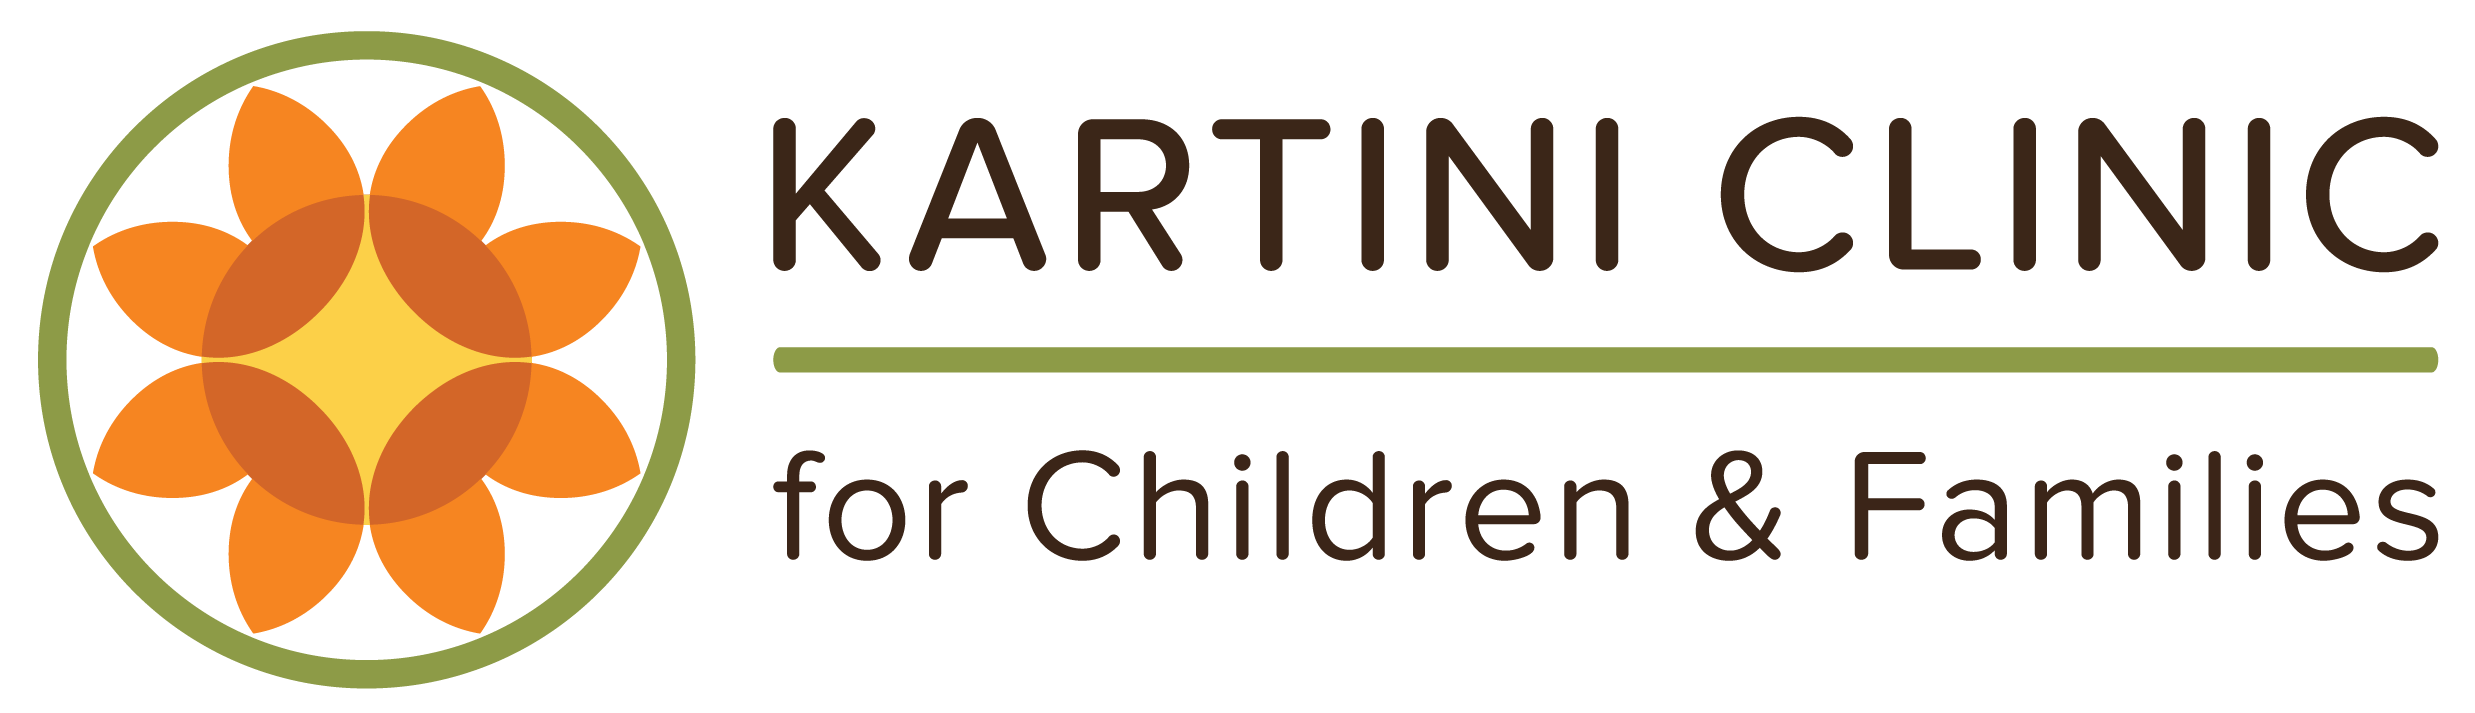 Kartini Clinic for Children and Families